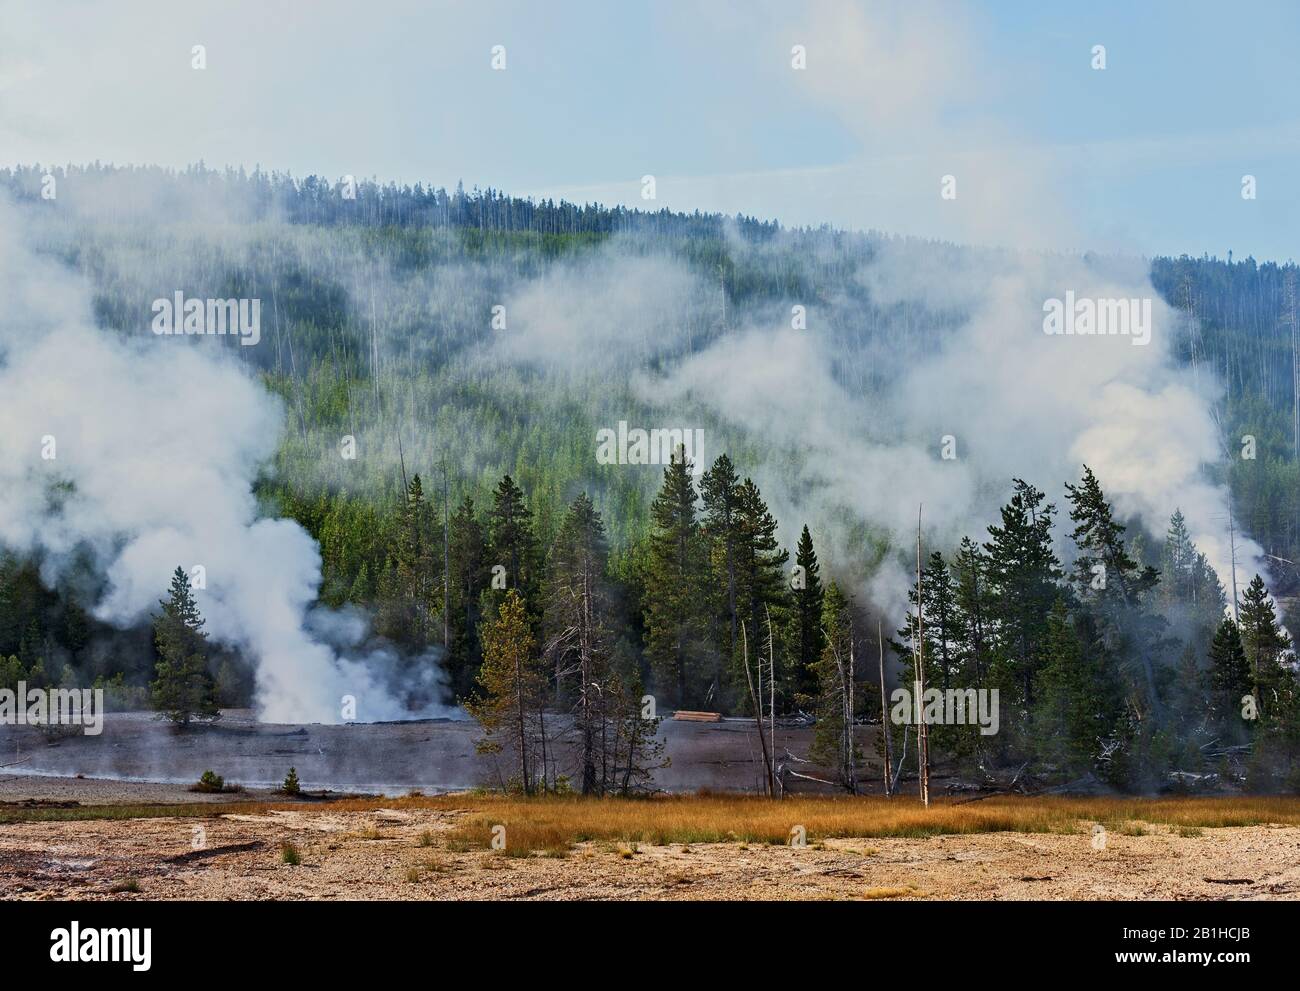 Clearing of dirt and brown grass with green trees, hot spring and forest beyond. Steam venting from geysers. Stock Photo